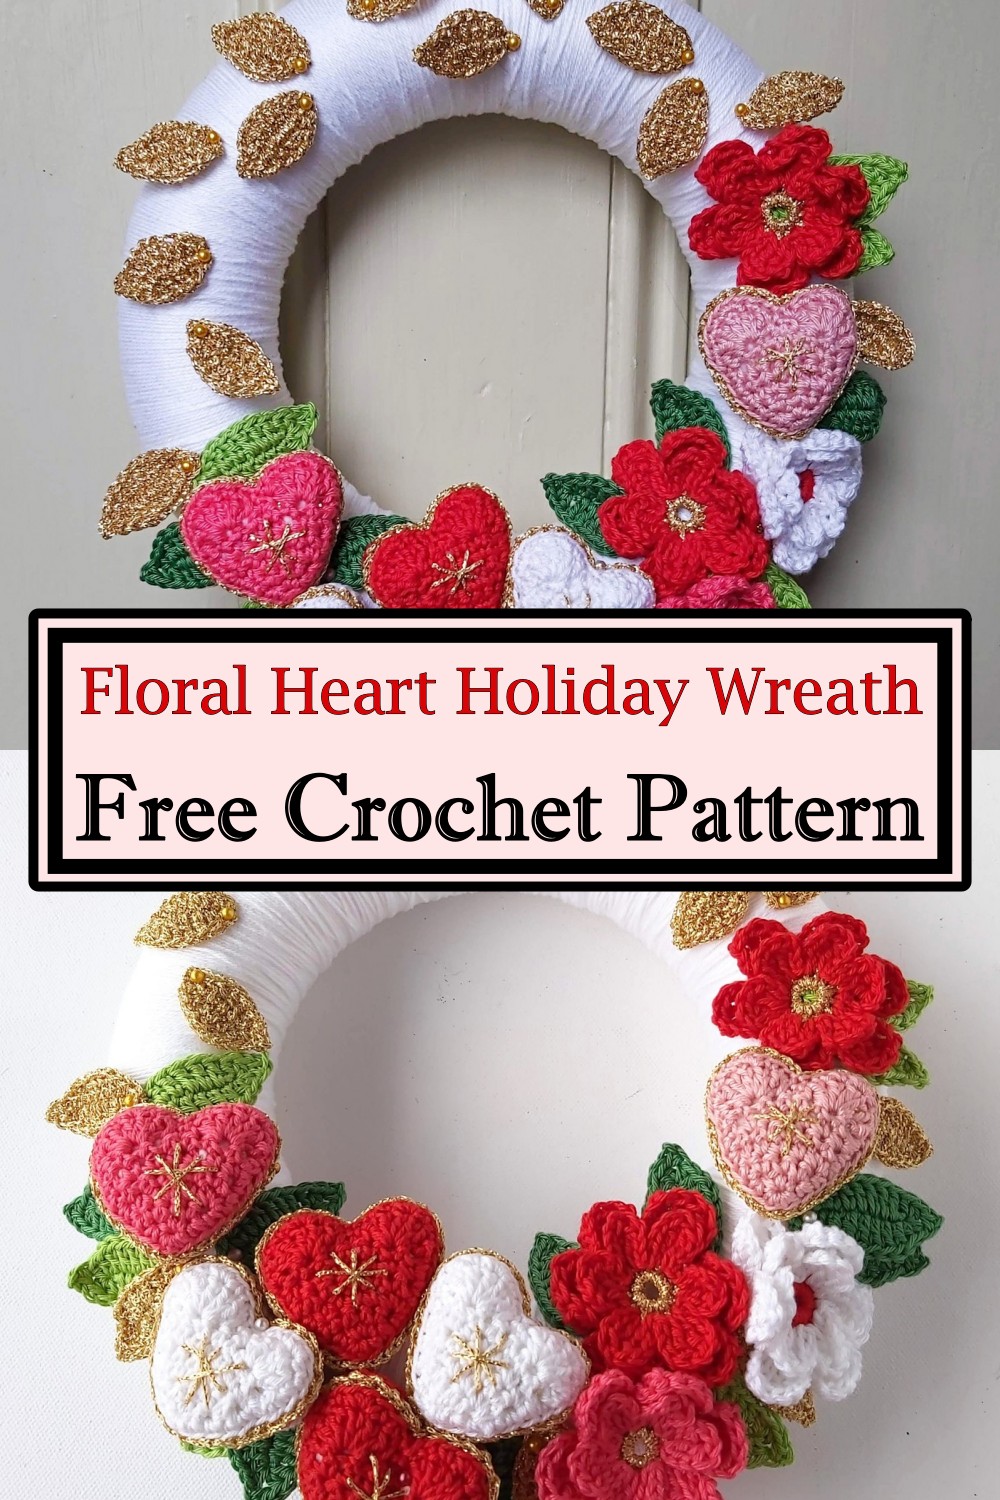 Floral Heart Holiday Wreath